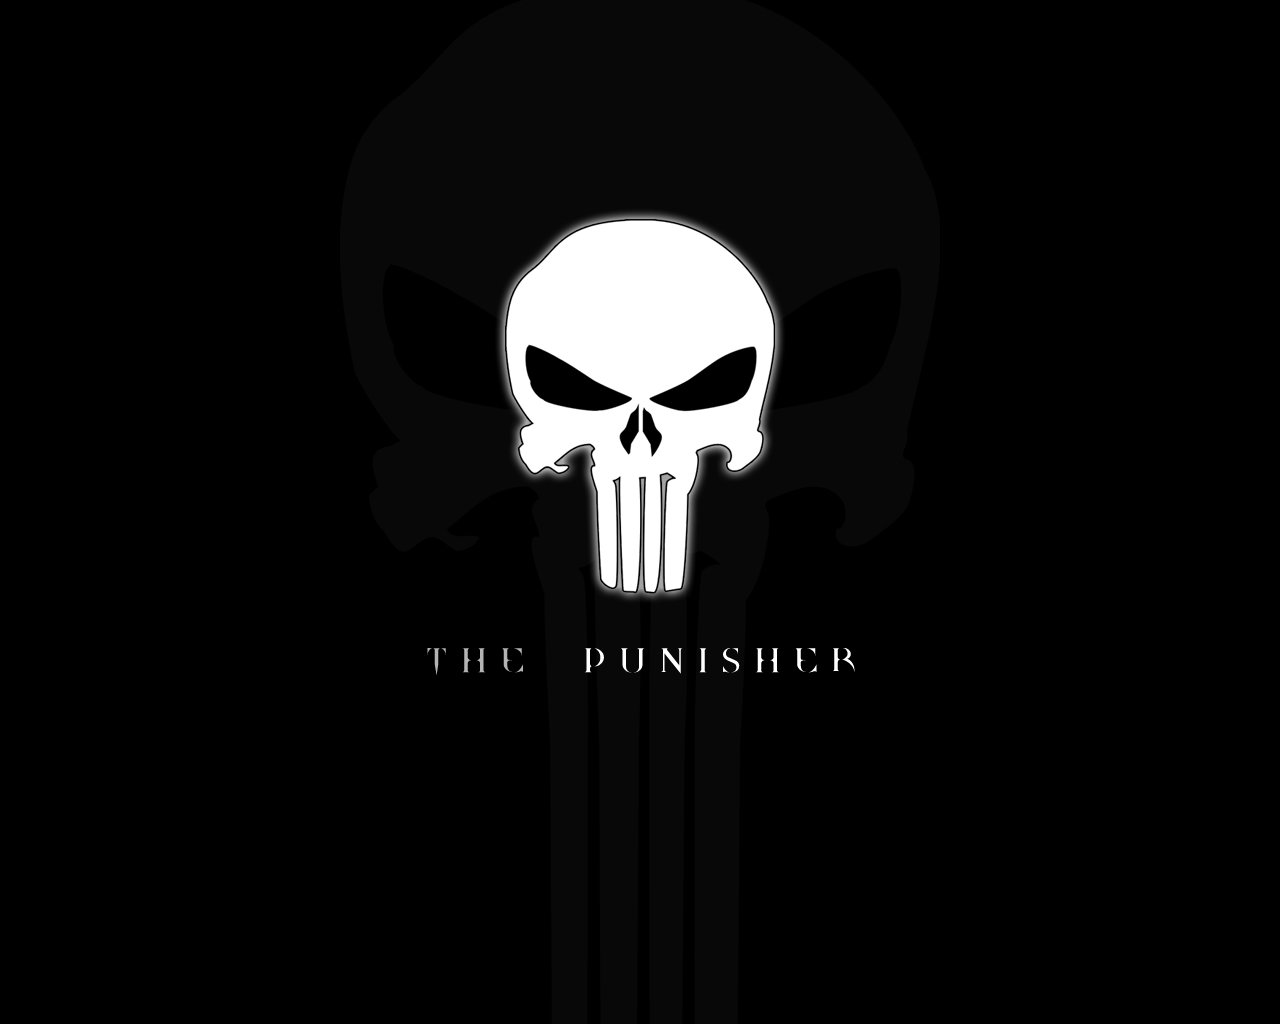 Url iPhone4wallpaper Us Movies The Punisher Html